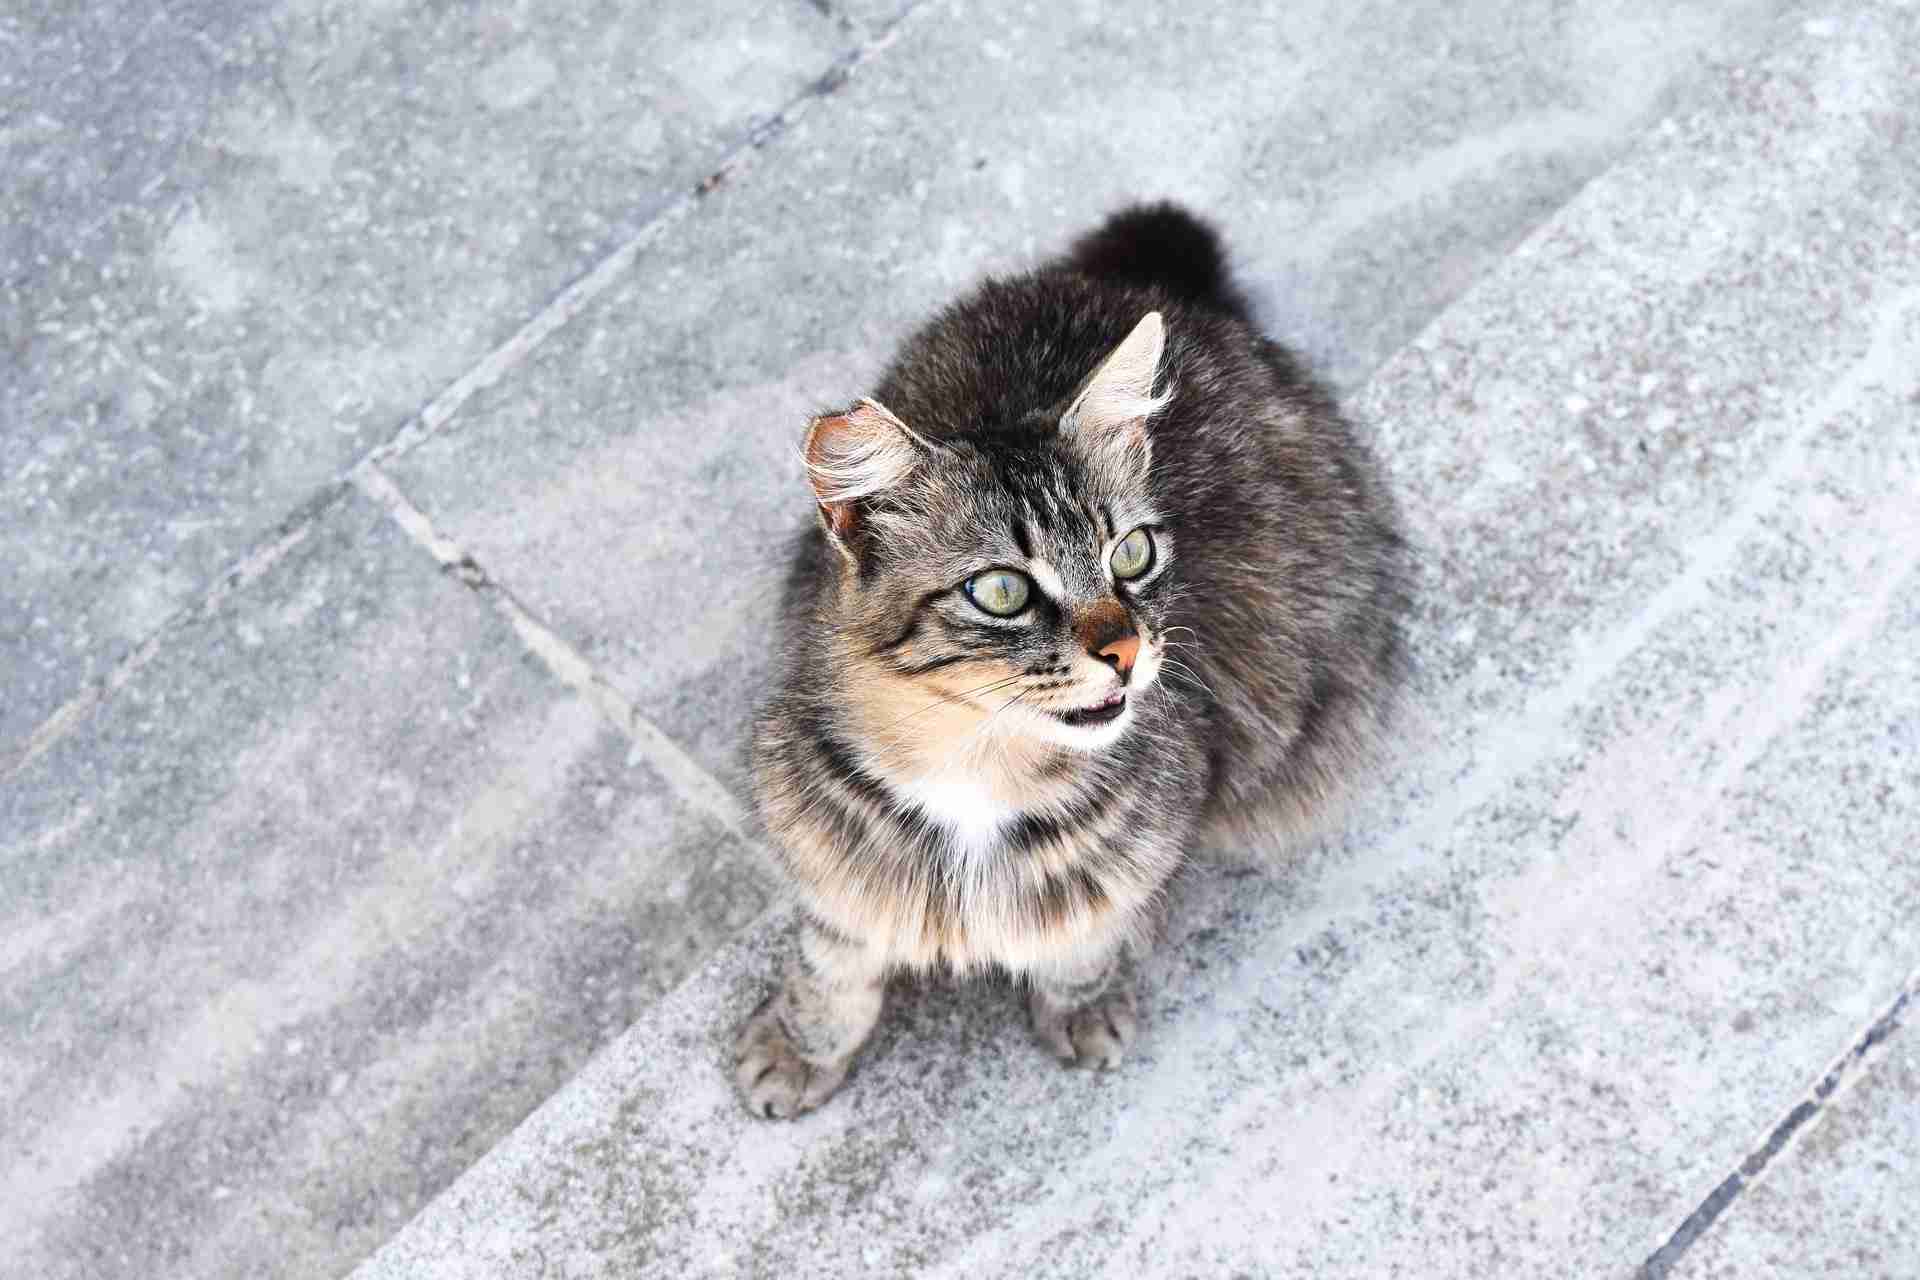 How to distinguish a stray cat from a feral cat or...